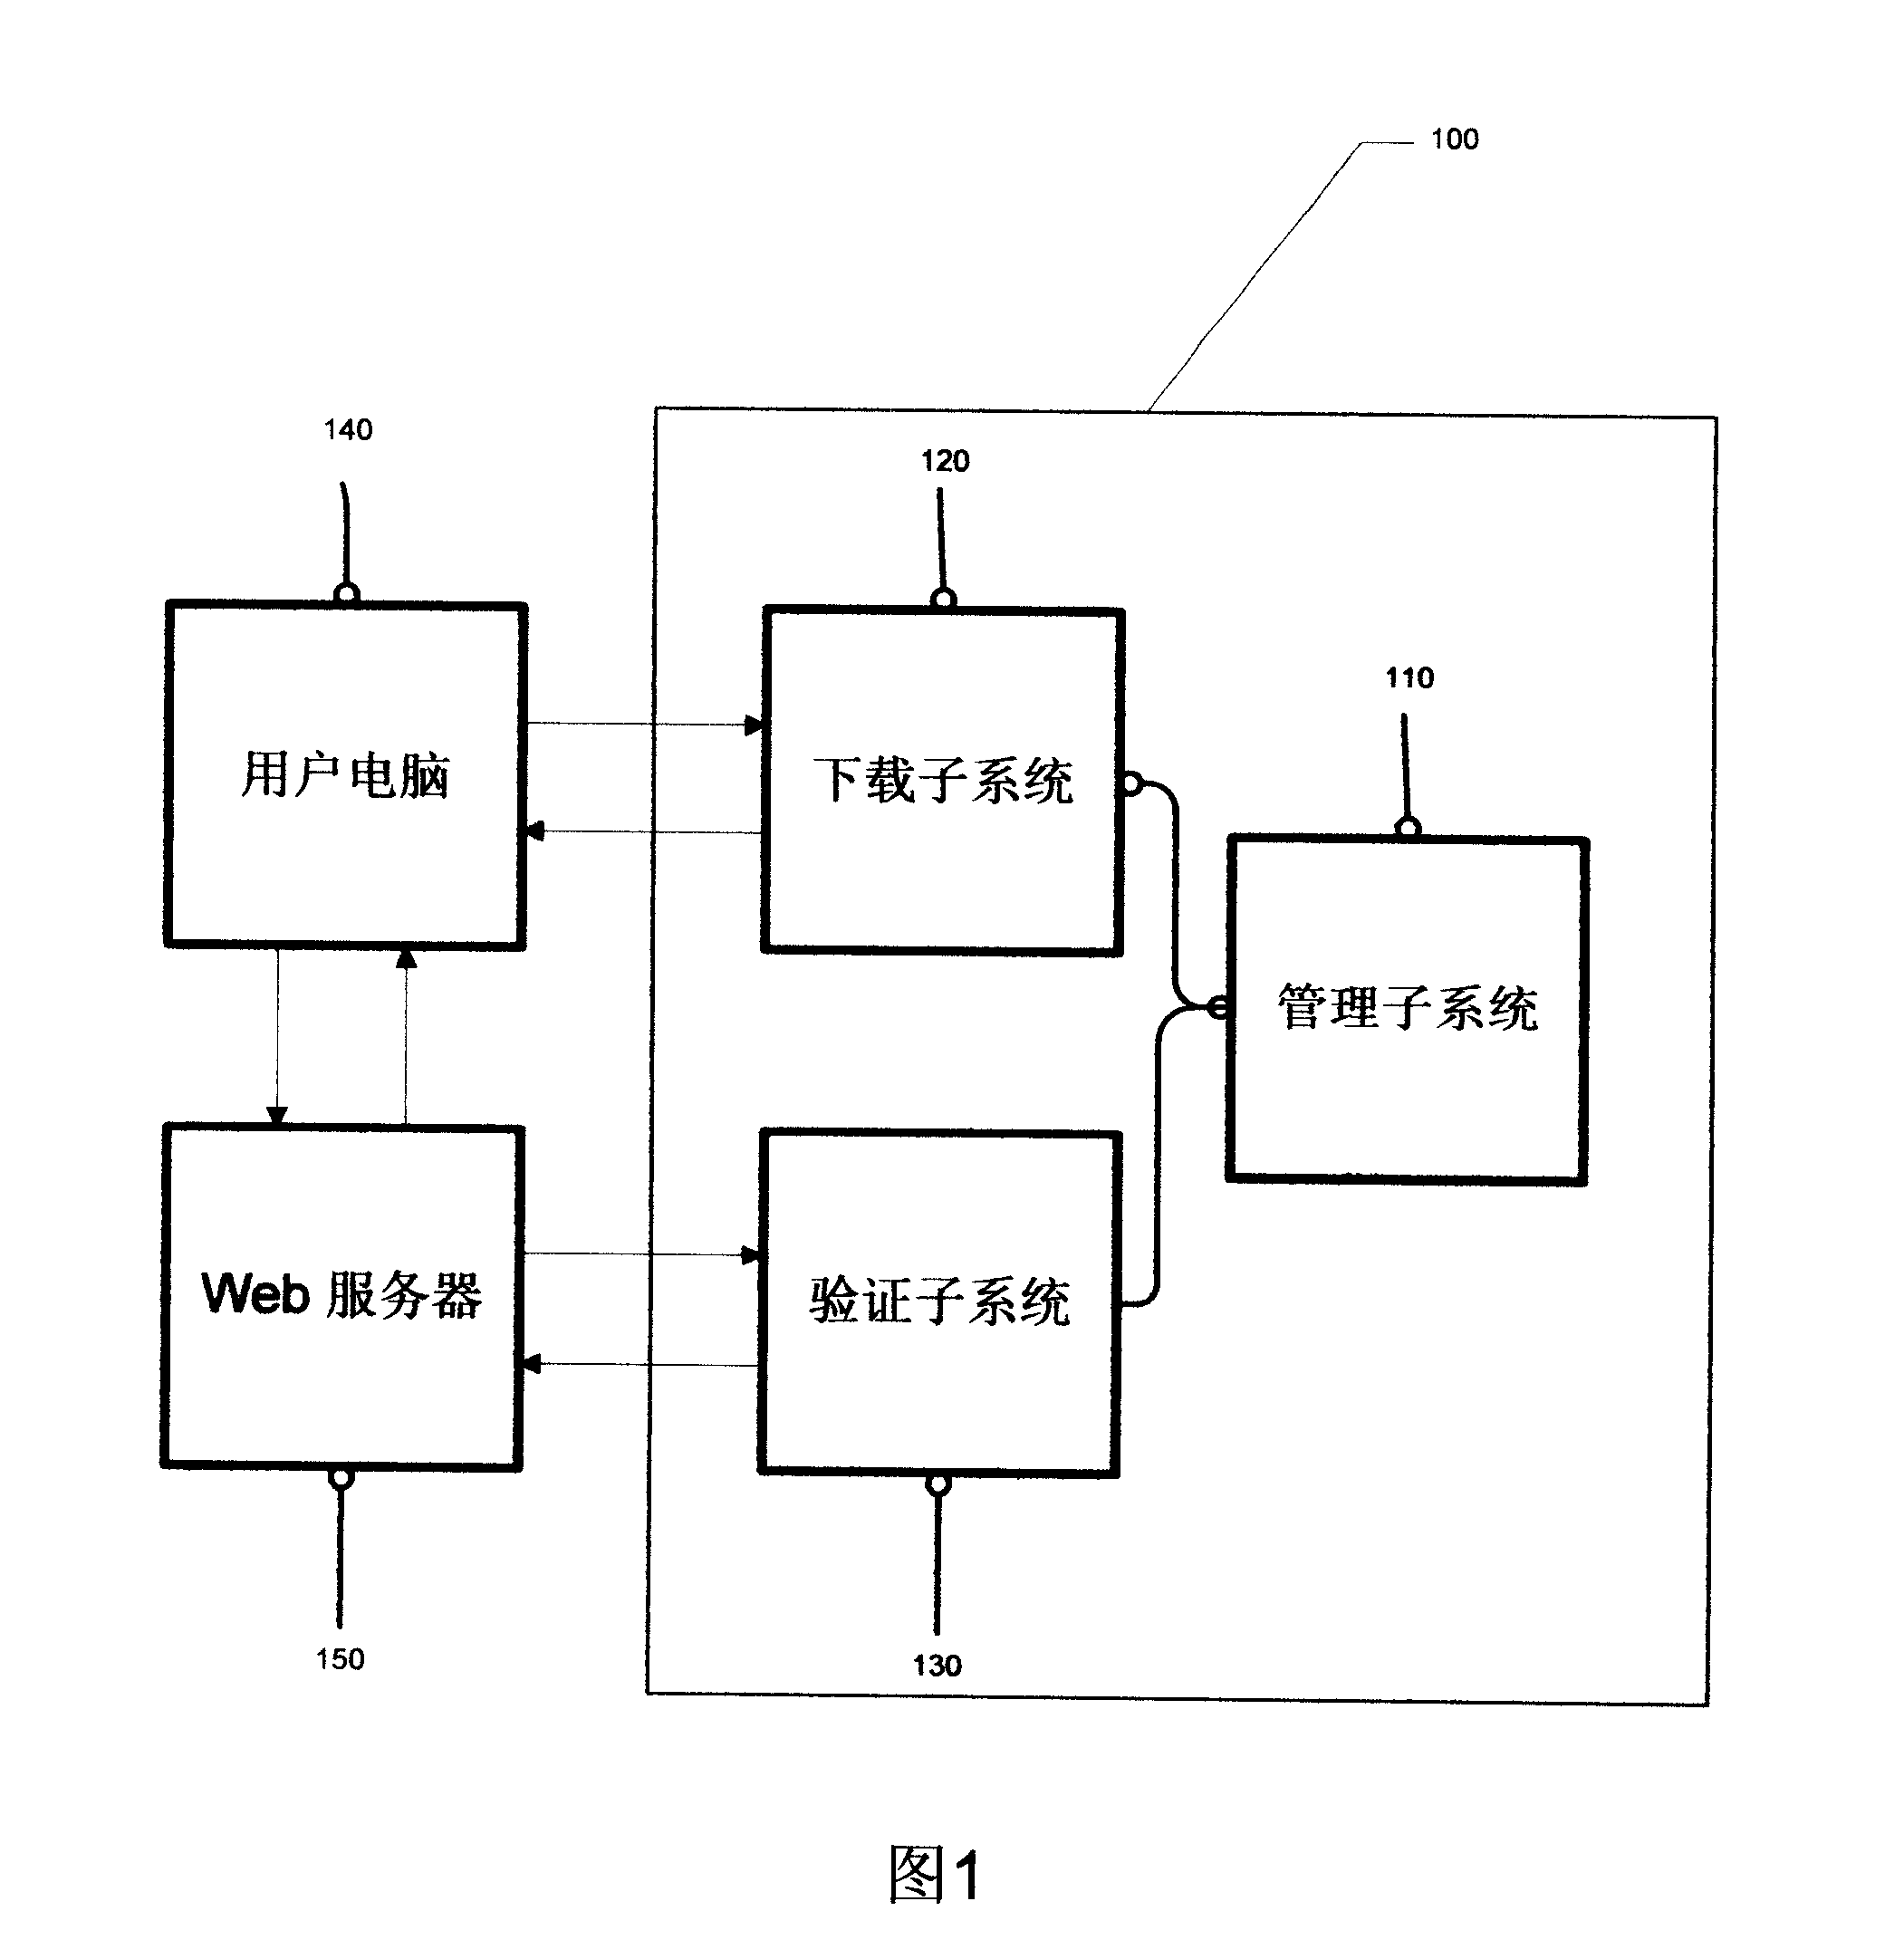 Advertisement content creating verification information system and method